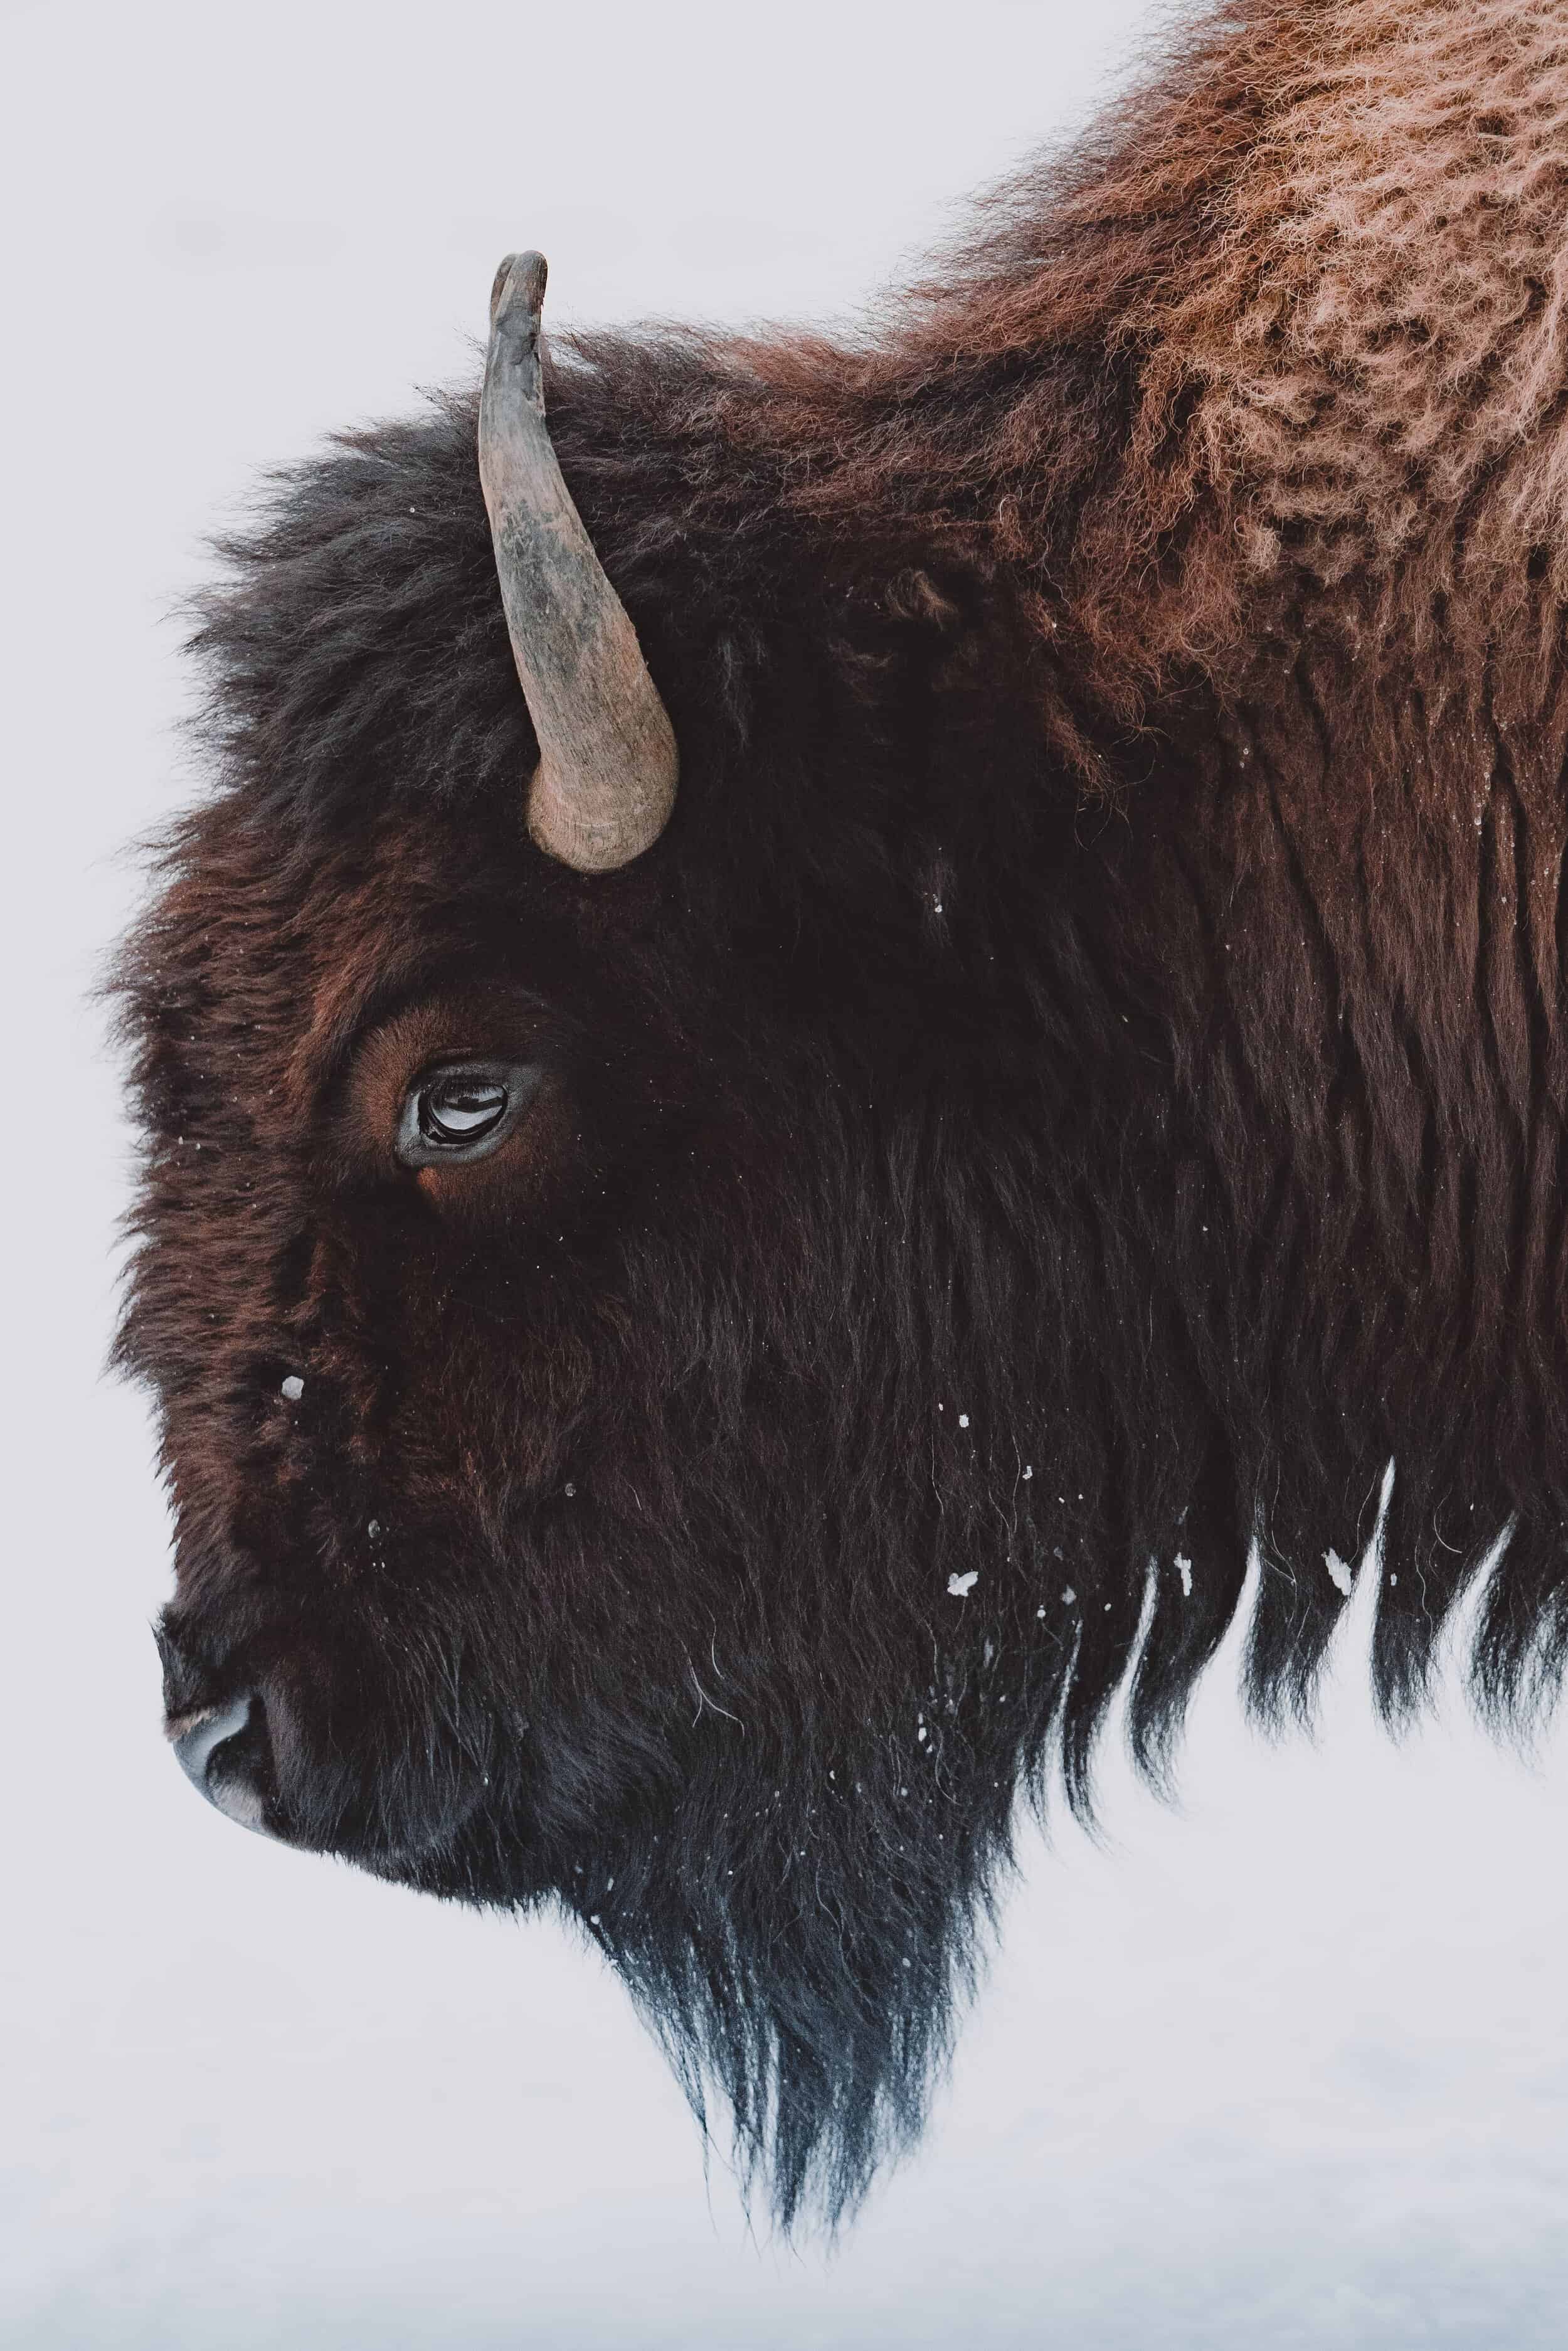 Bison head in winter scene with snow